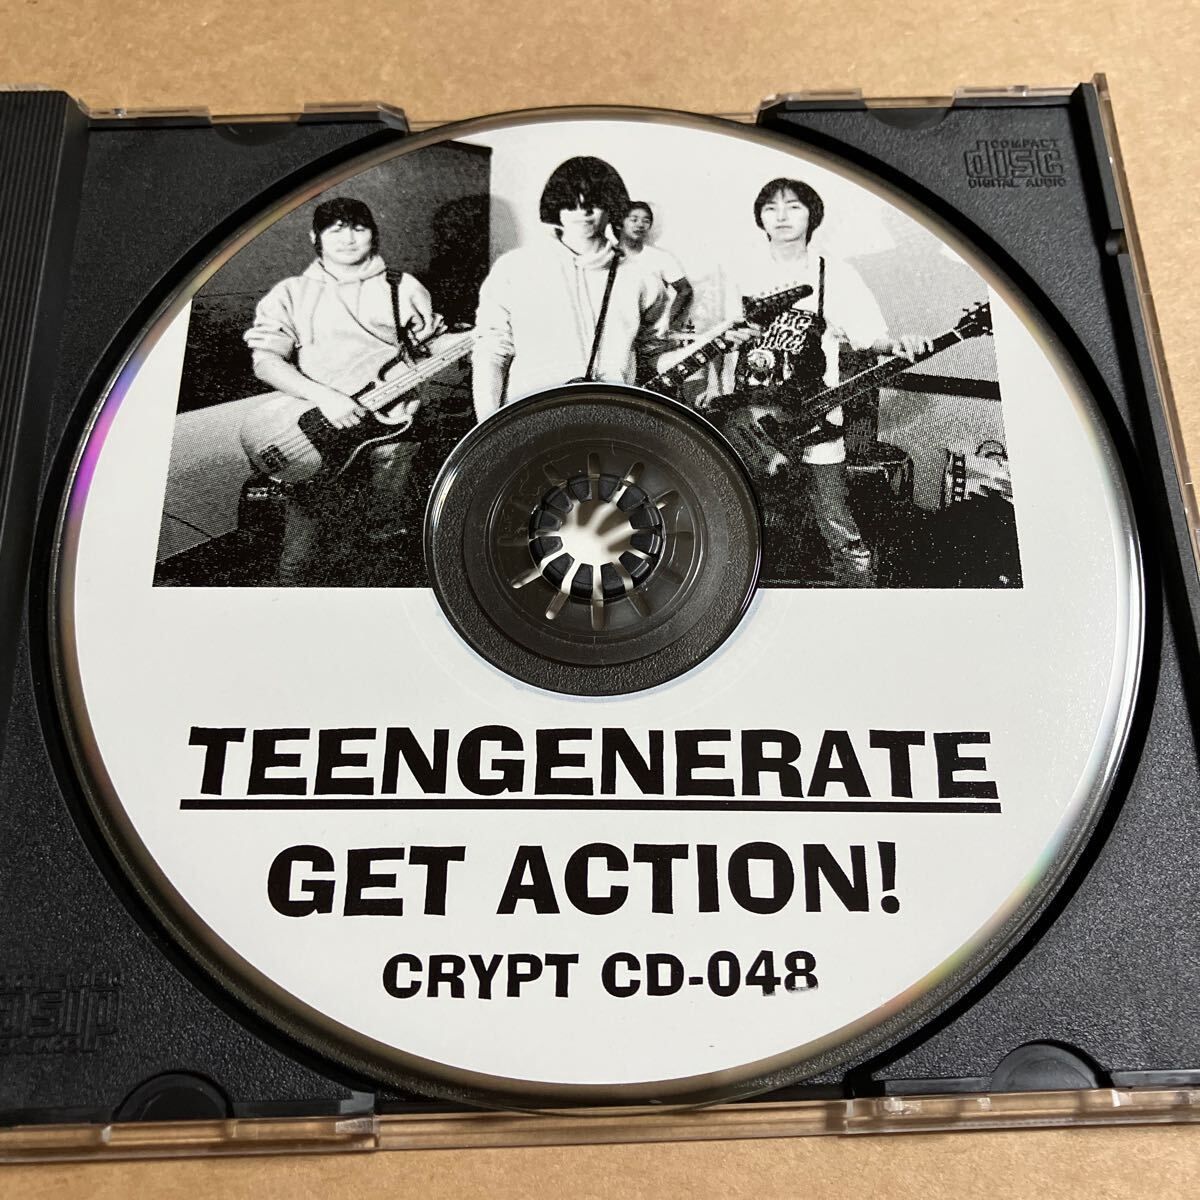 CD TEENGENERATE / GET ACTION CRYPT048 tea njene Ray toCRYPT RECORDS : GARAGE punk heaven country FIRESTARTER case attrition 